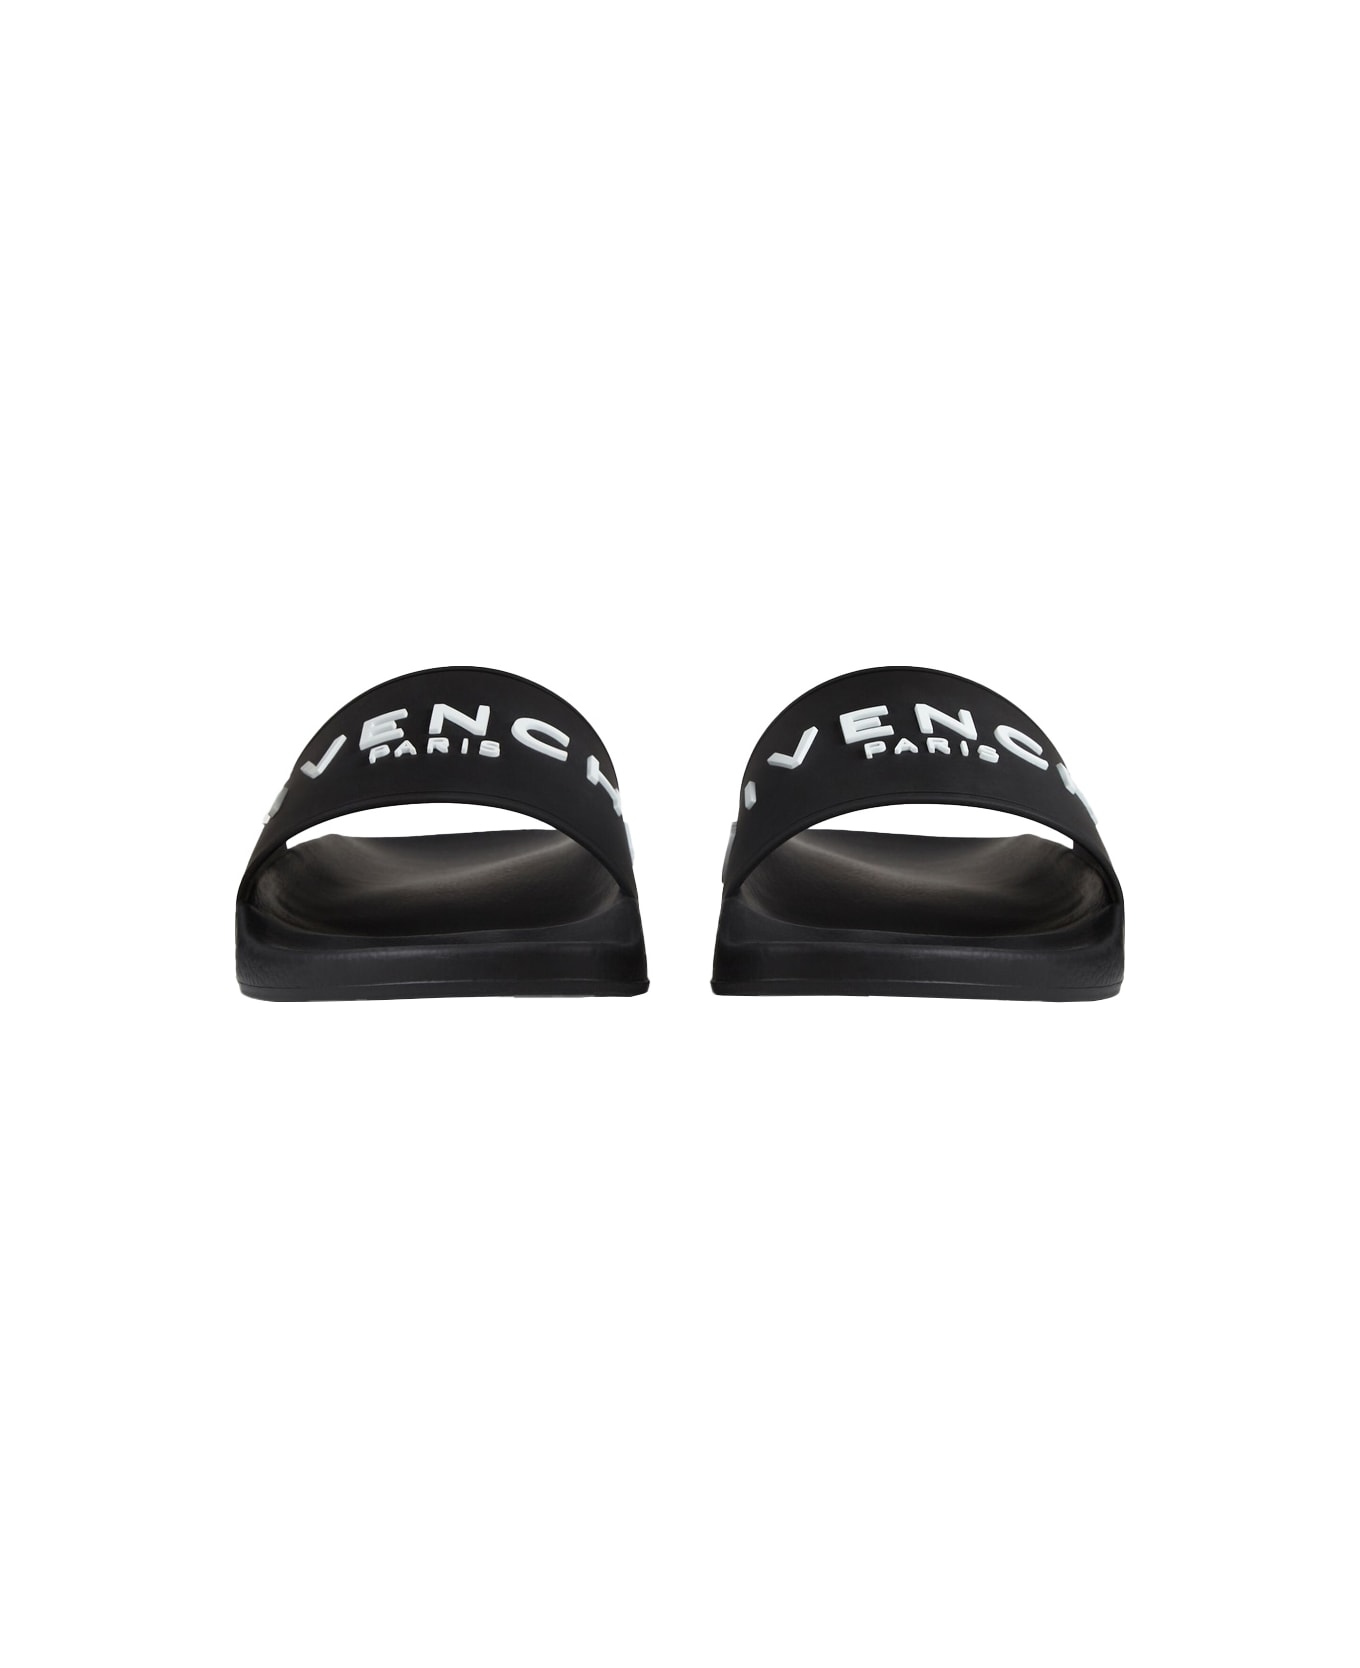 Givenchy Paris Slippers In Black Rubber - Black